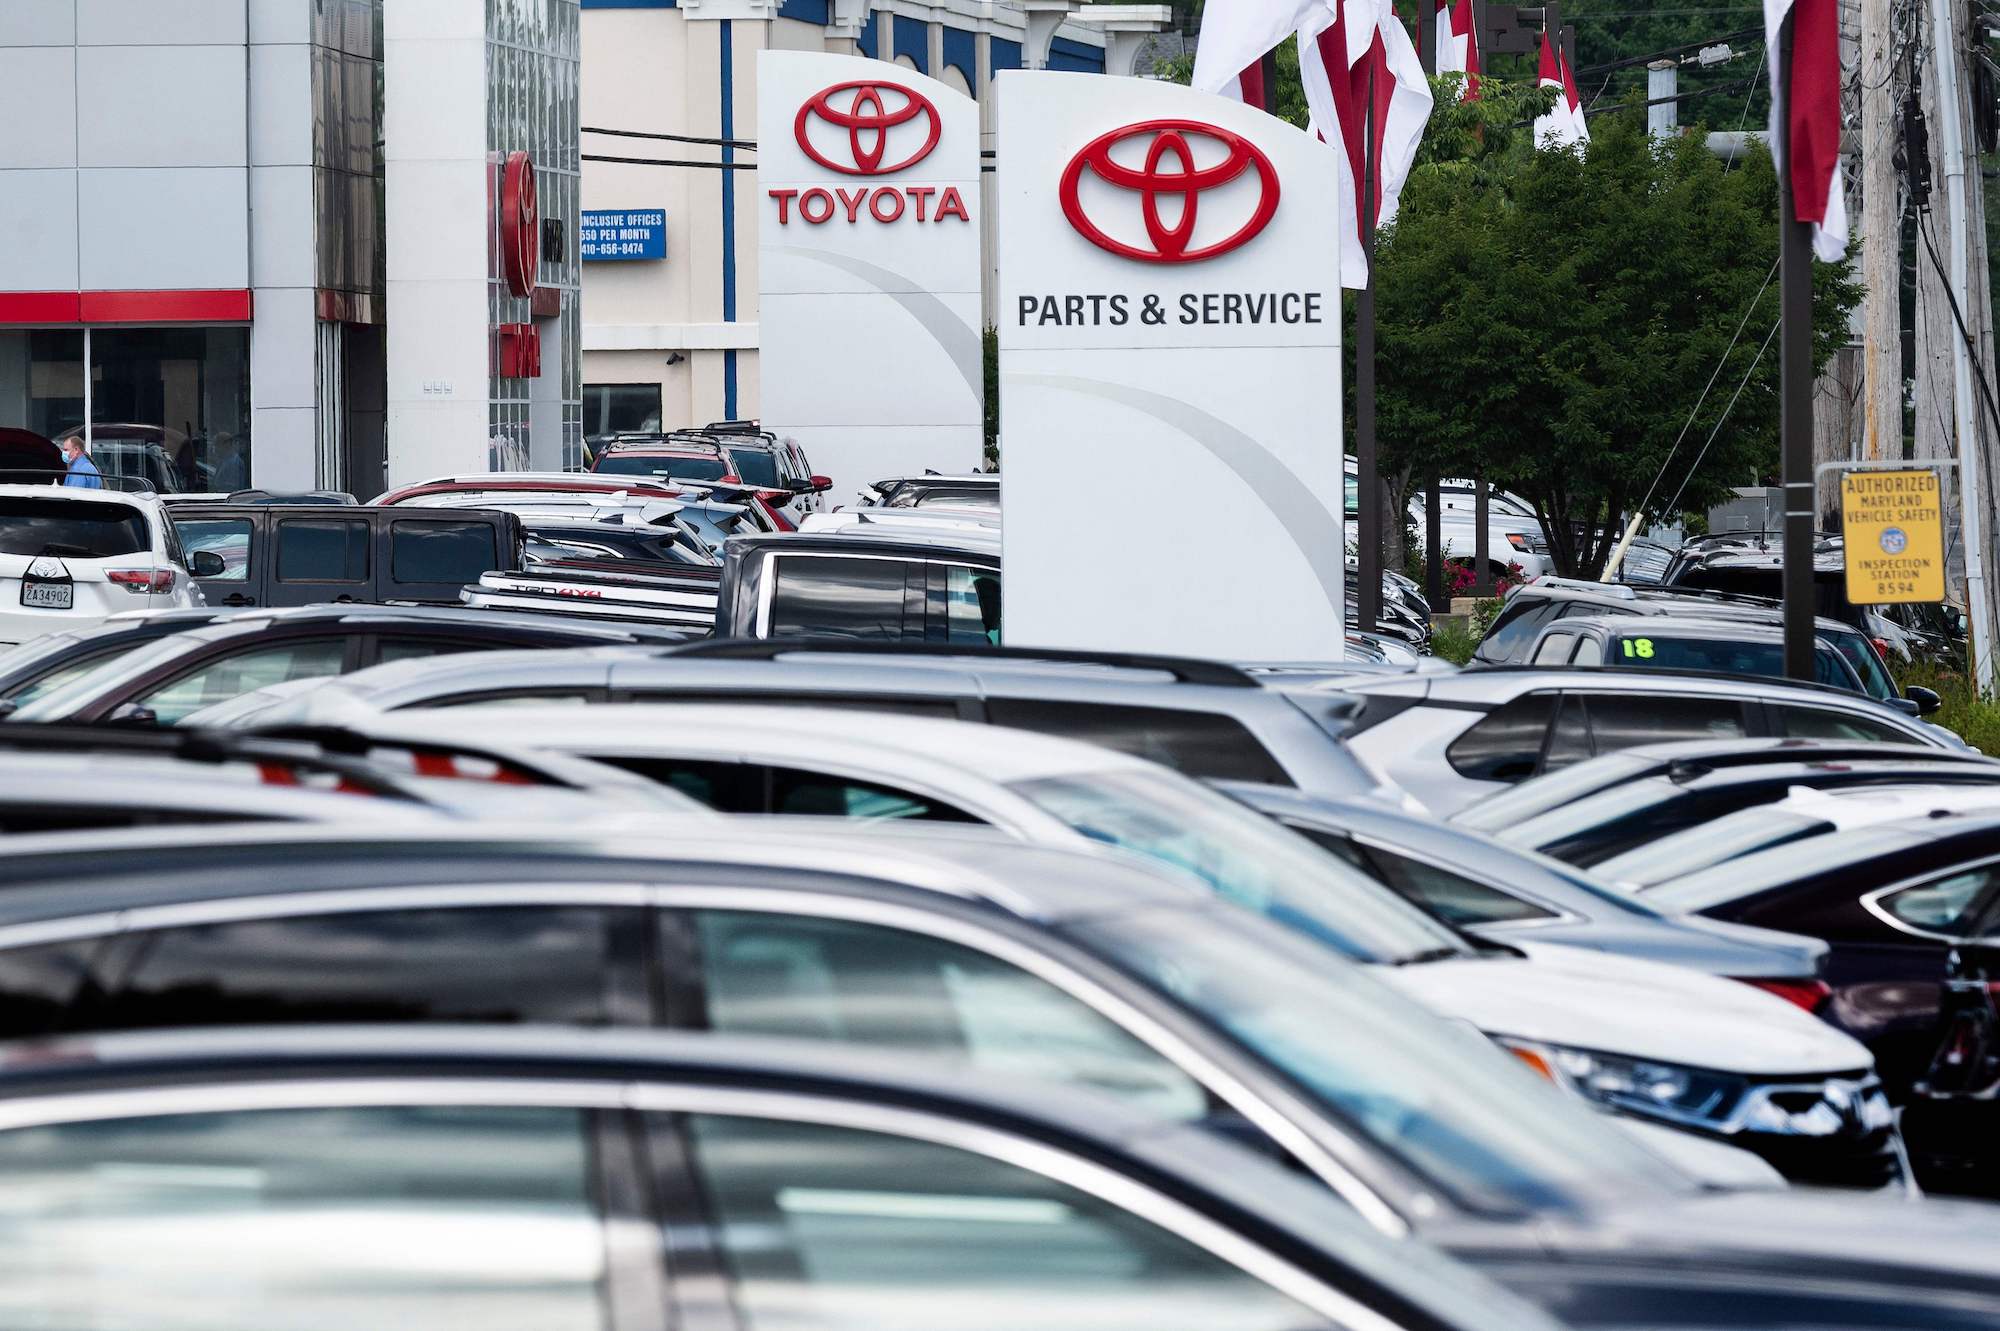 A Toyota car dealership in Annapolis, Maryland, on May 27, 2021